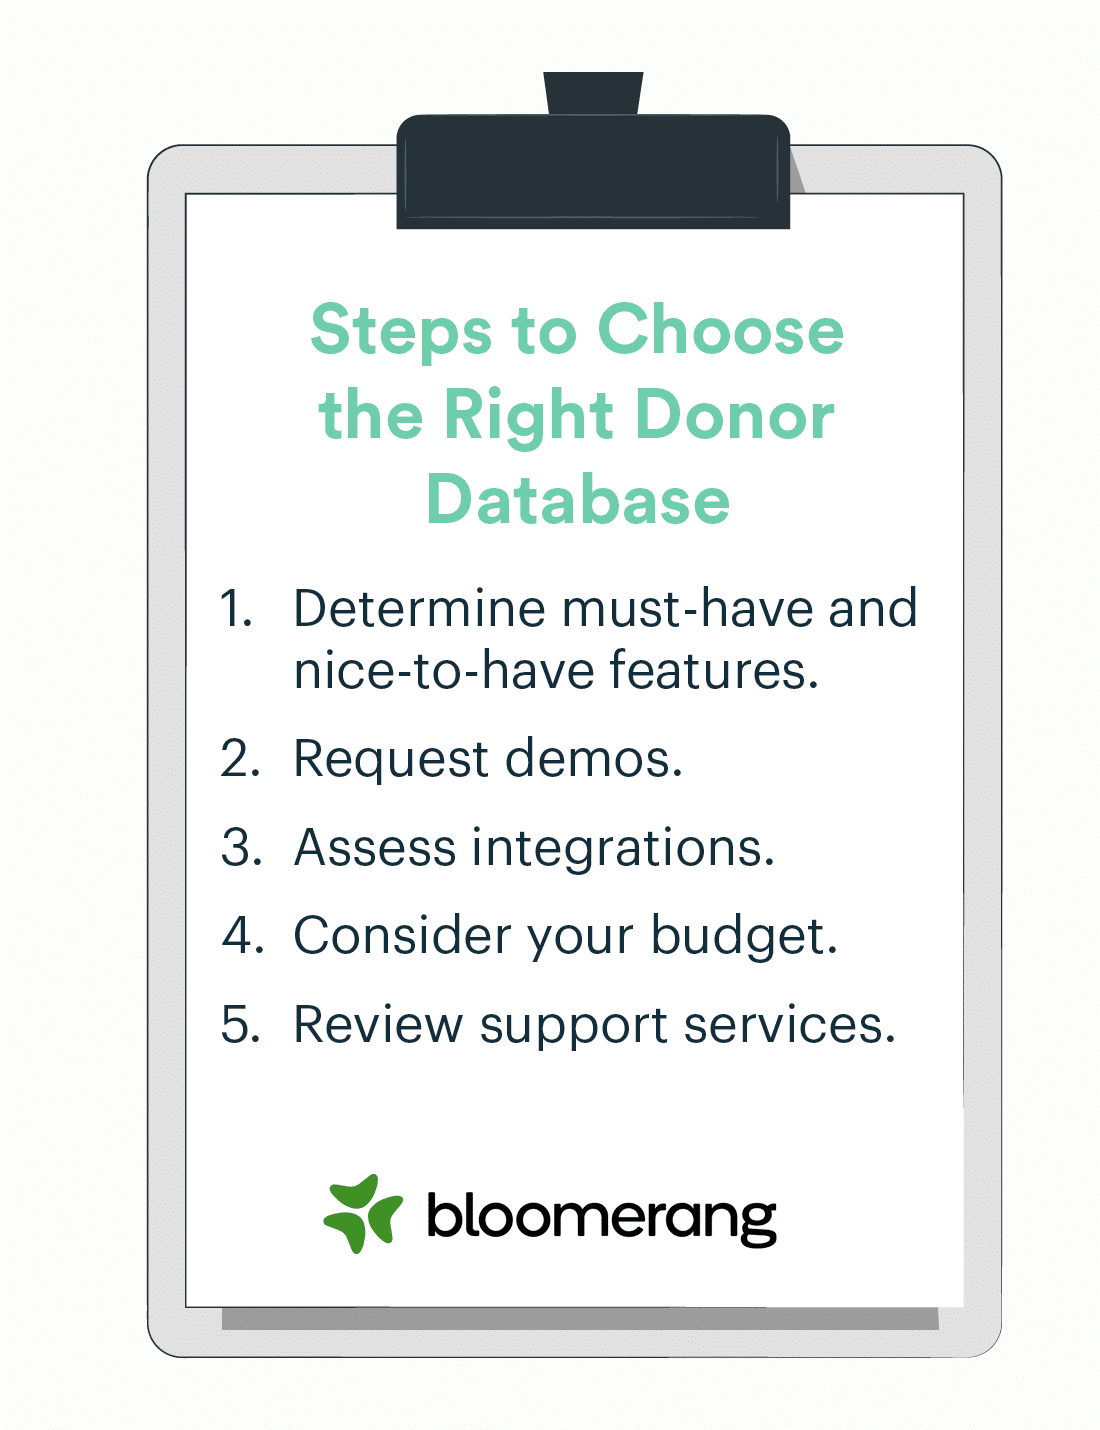 This image shows the steps of choosing the right donor database (described in the list below). 